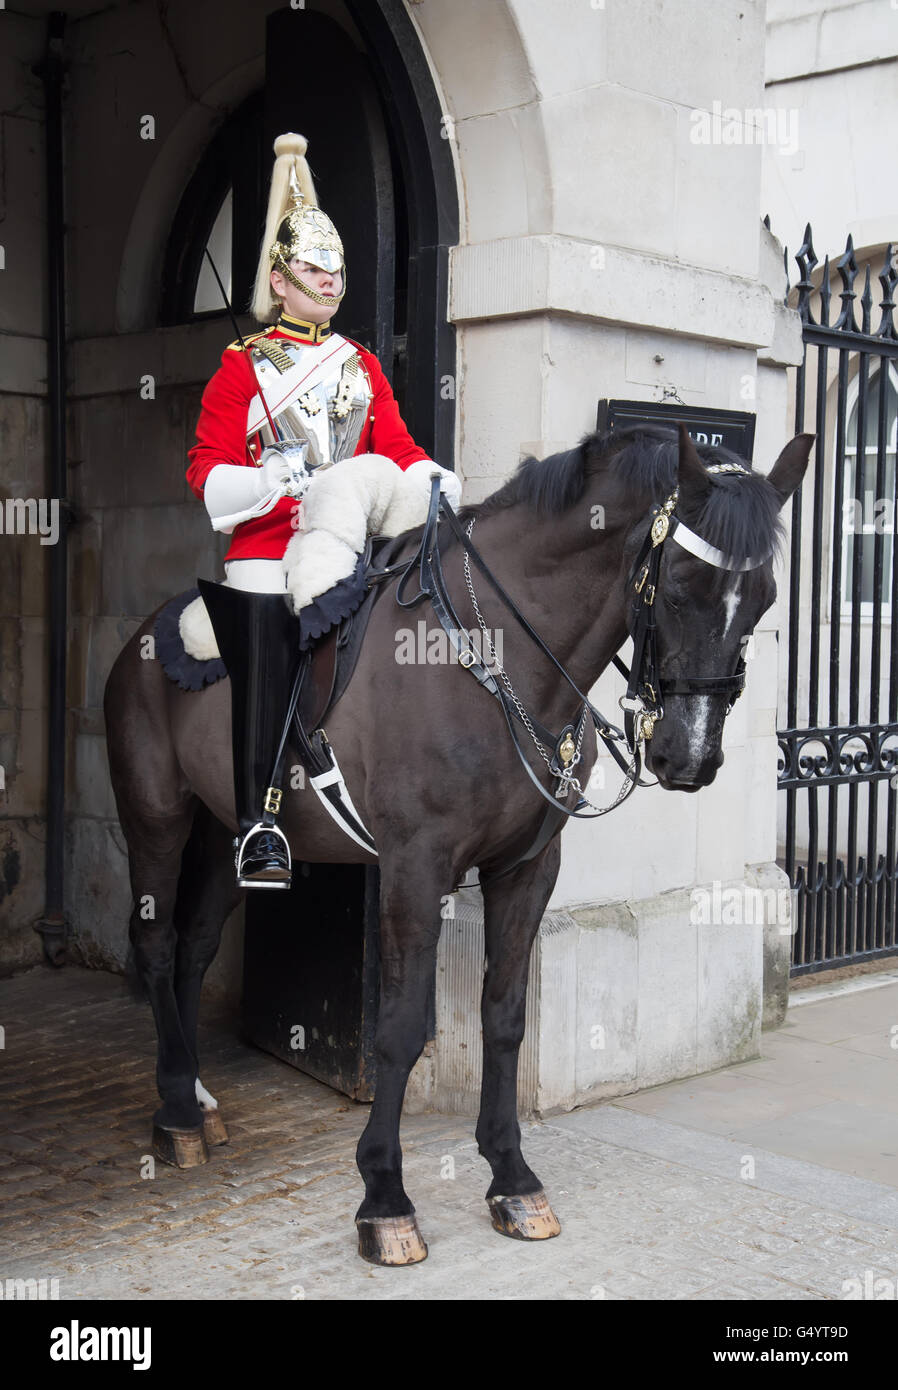 LONDON - APRIL 16: Unidentified men members of the royal guard nearby Whitehall palace on April 16, 2016 in London, United Kingd Stock Photo